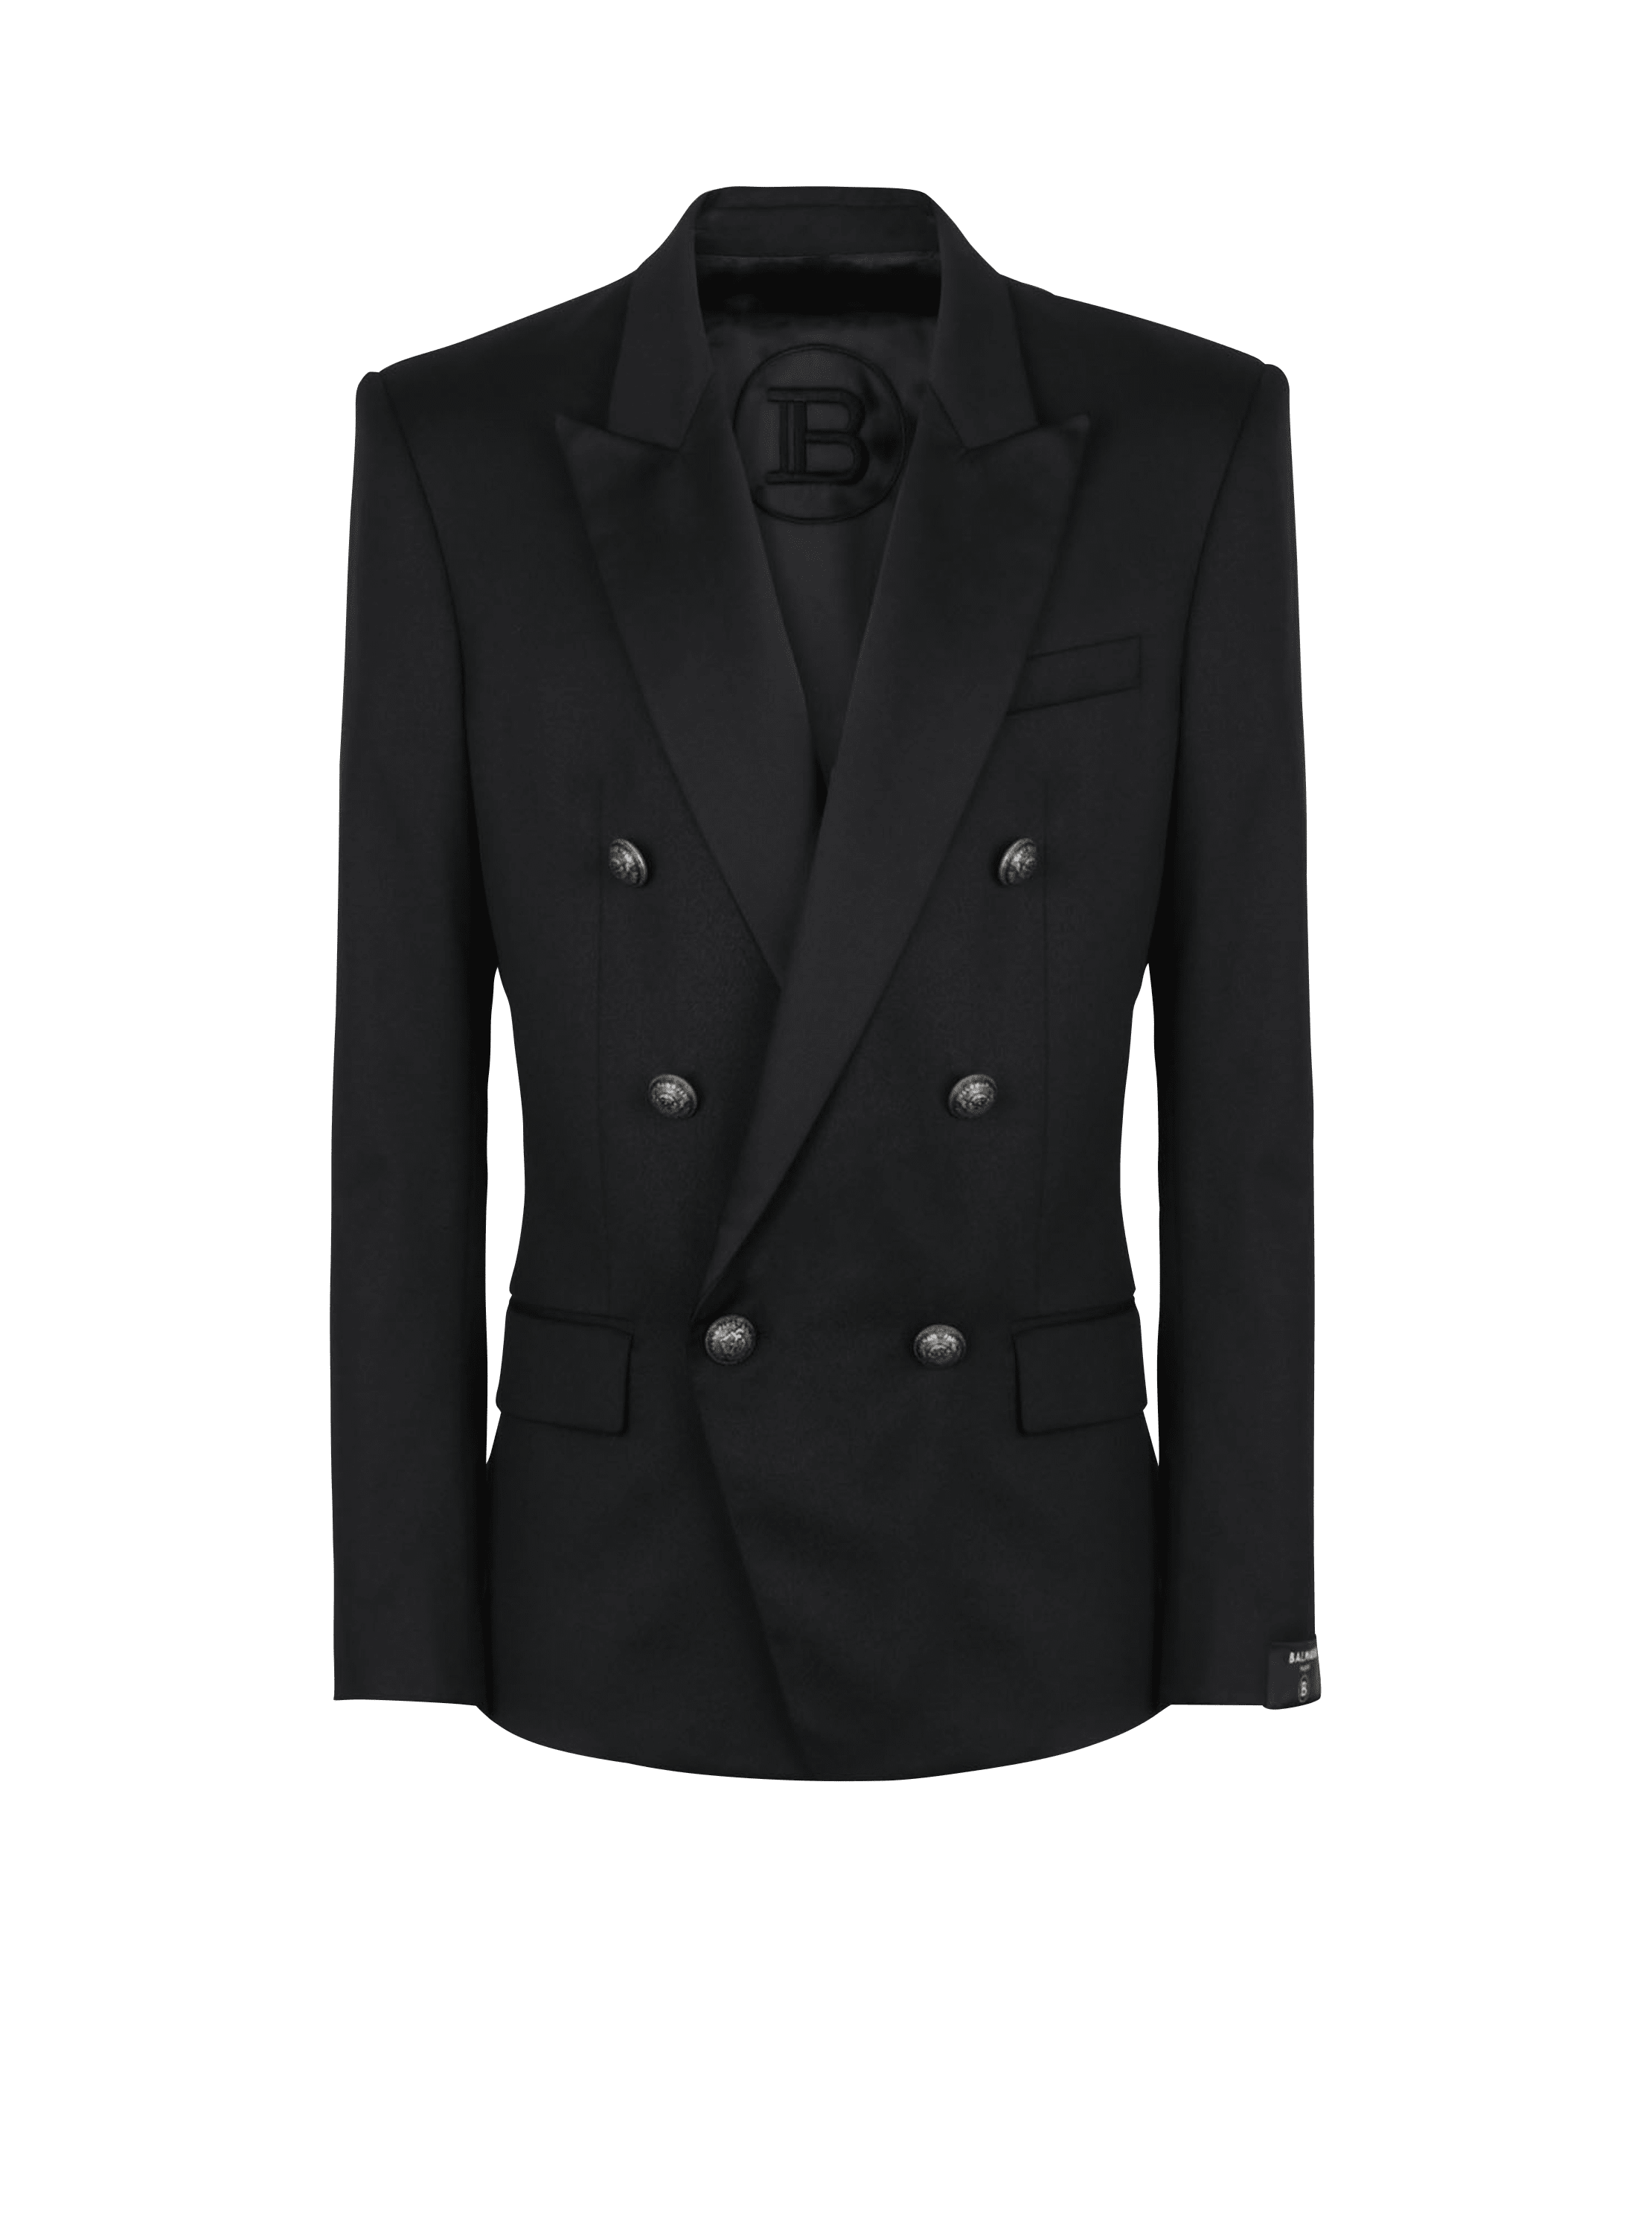 Men's Black Wool Gold Button Double Breasted Blazer in Size X-Large - Phix Clothing Official